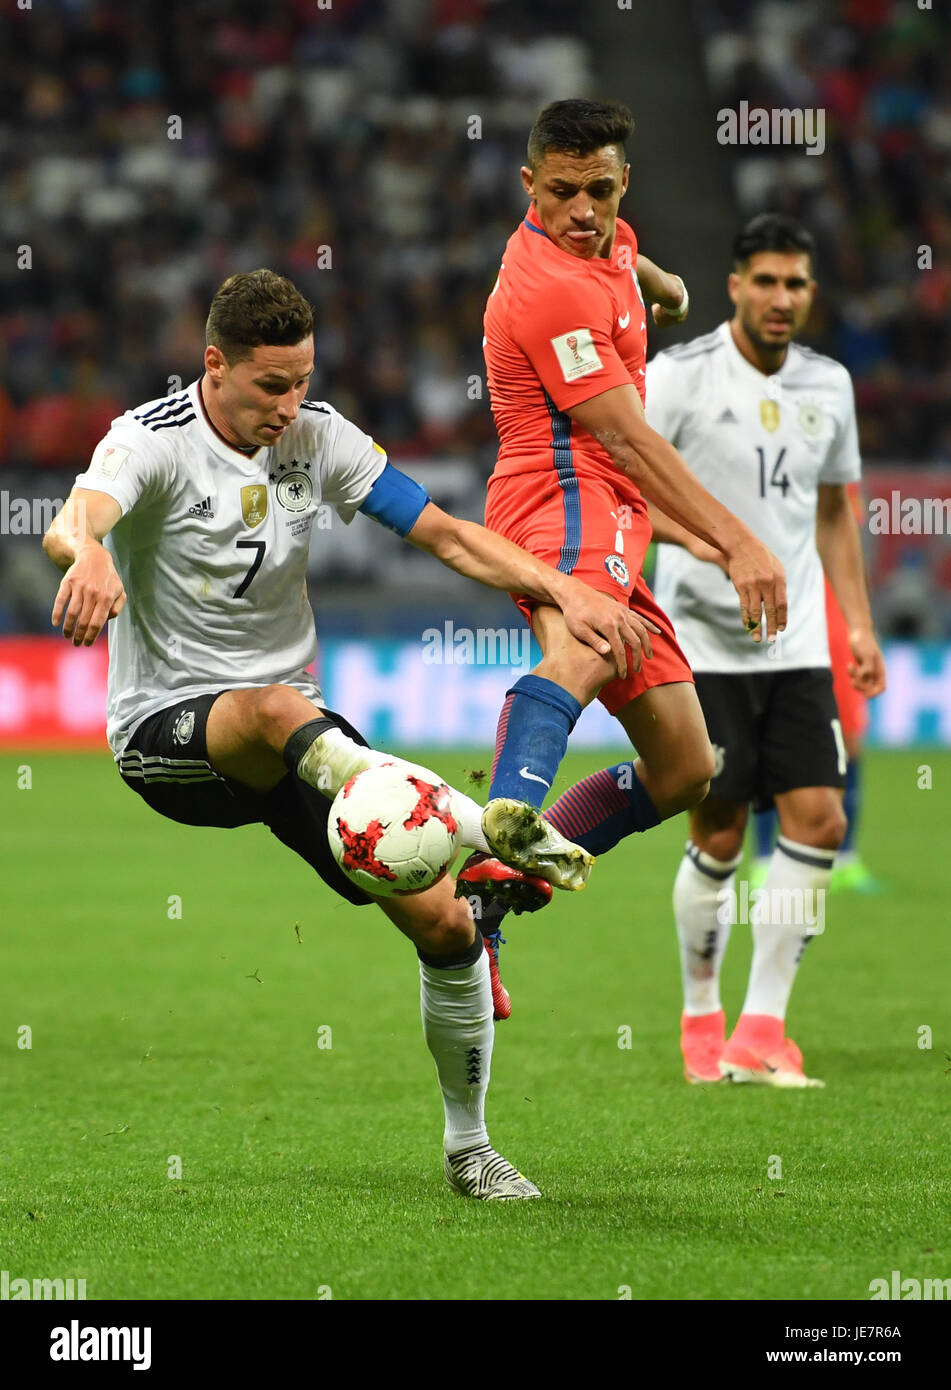 Kazan, Russia. 22nd June, 2017. Germany's Julian Draxler (L) and Chile's Alexis Sanchez vie for the ball during the Group B preliminary stage soccer match between Chile and Germany at the Confederations Cup in Kazan, Russia, 22 June 2017. Photo: Marius Becker/dpa/Alamy Live News Stock Photo